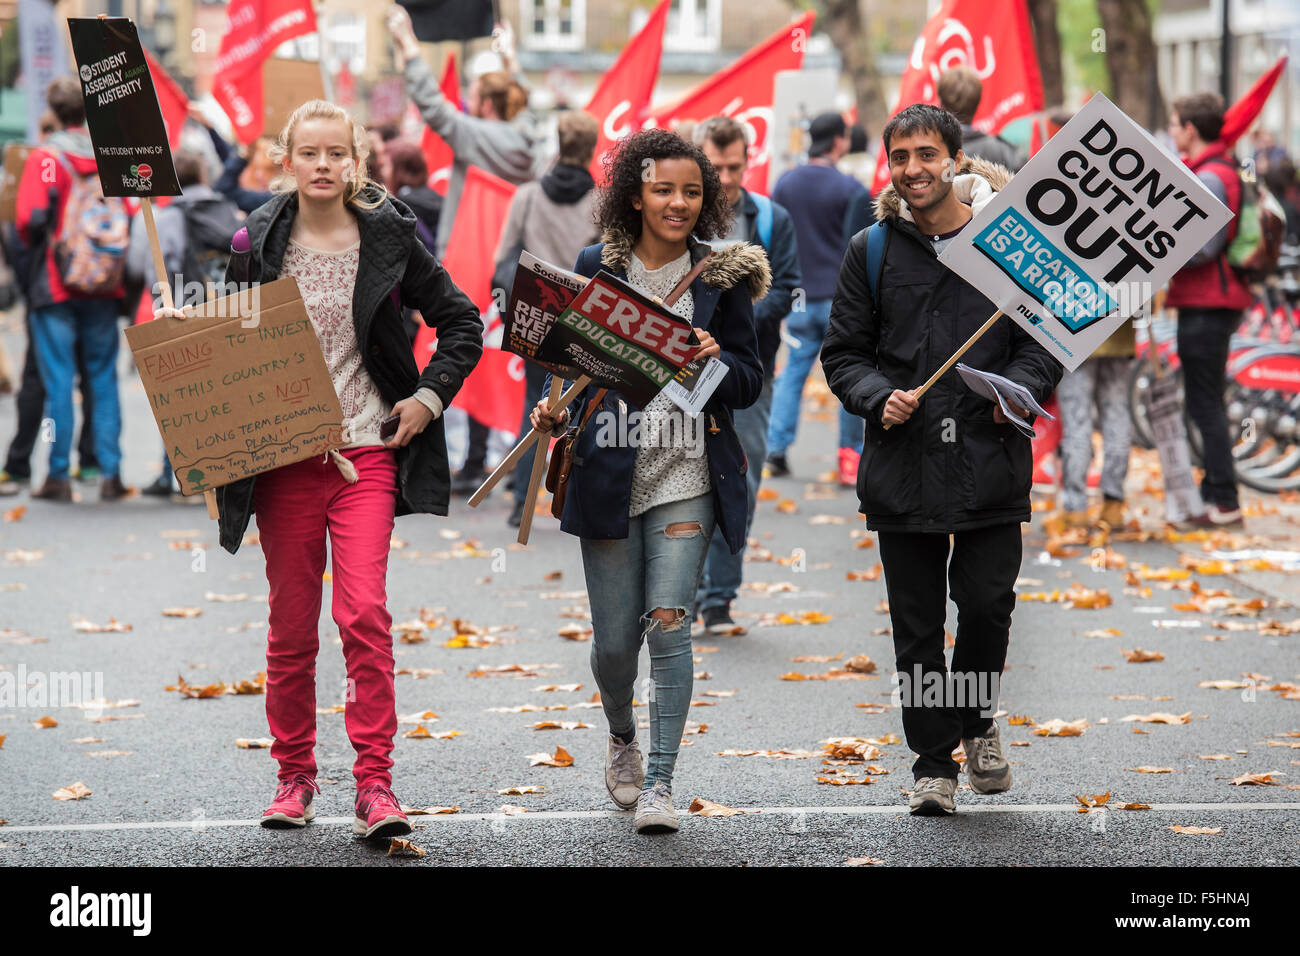 London, UK. 4th November, 2015. A student march against fees and many other issues starts in Malet Street and heads for Westminster via the West End. Credit:  Guy Bell/Alamy Live News Stock Photo